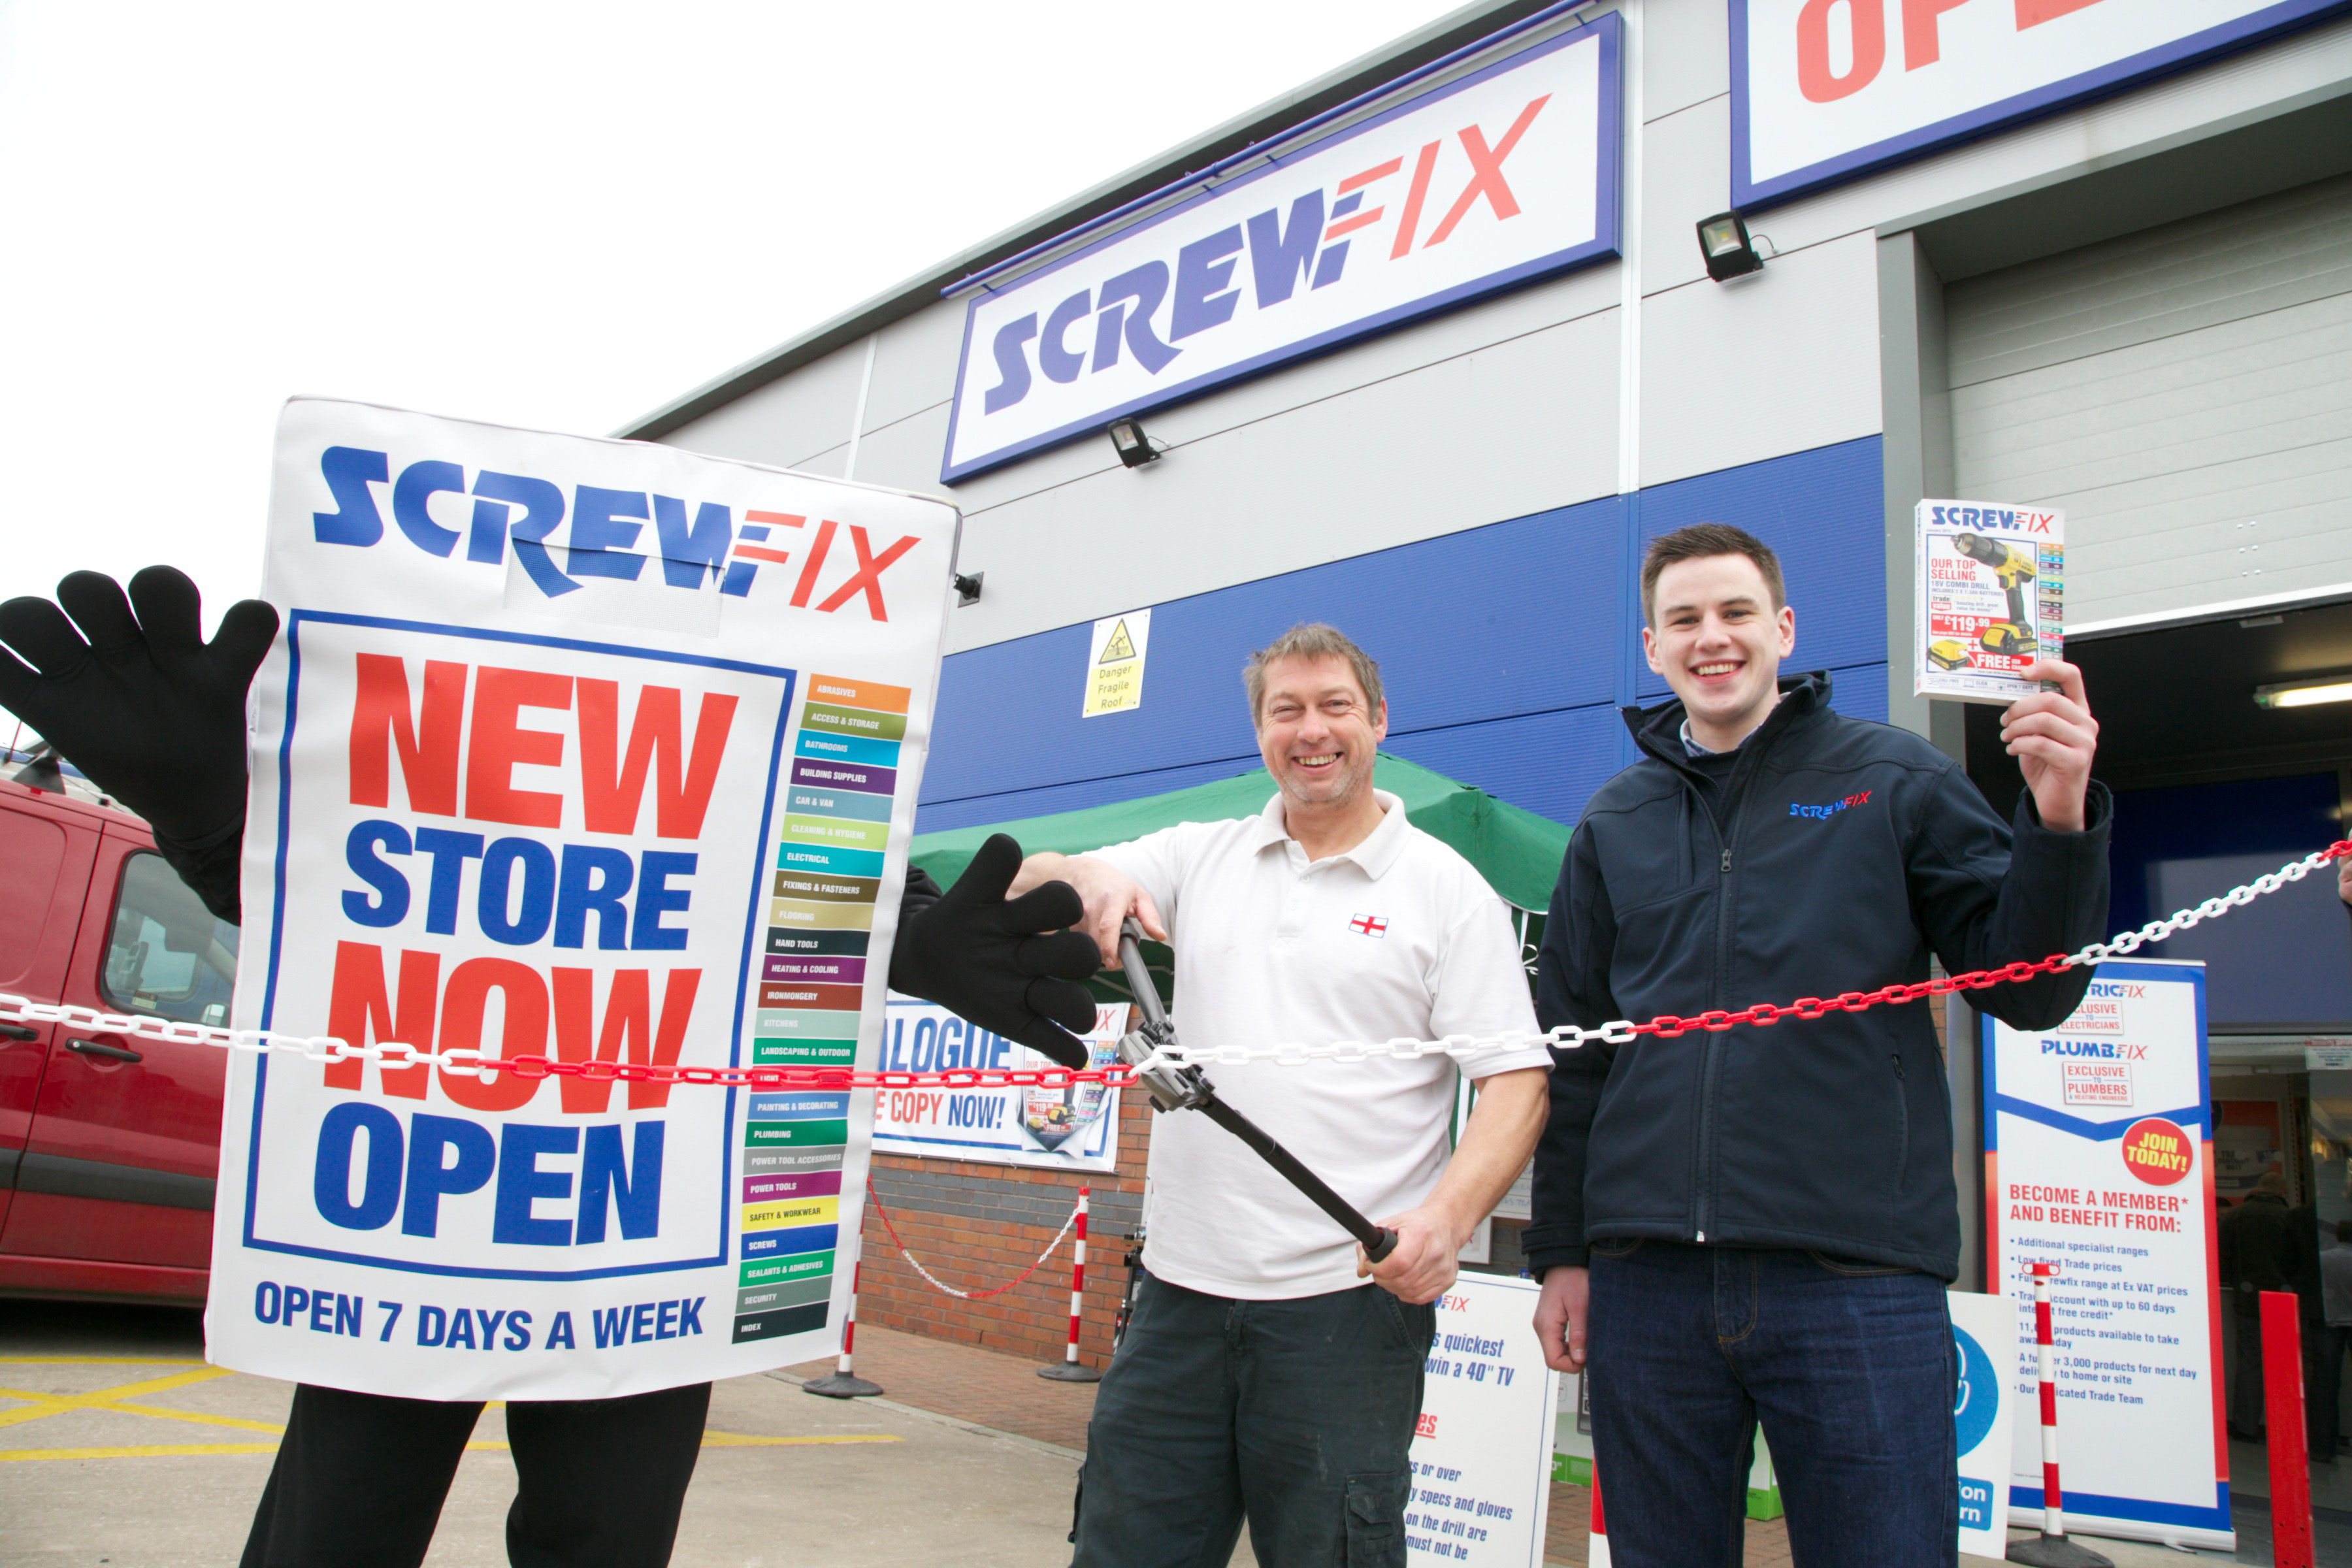 Leigh’s first Screwfix store is declared a runaway success